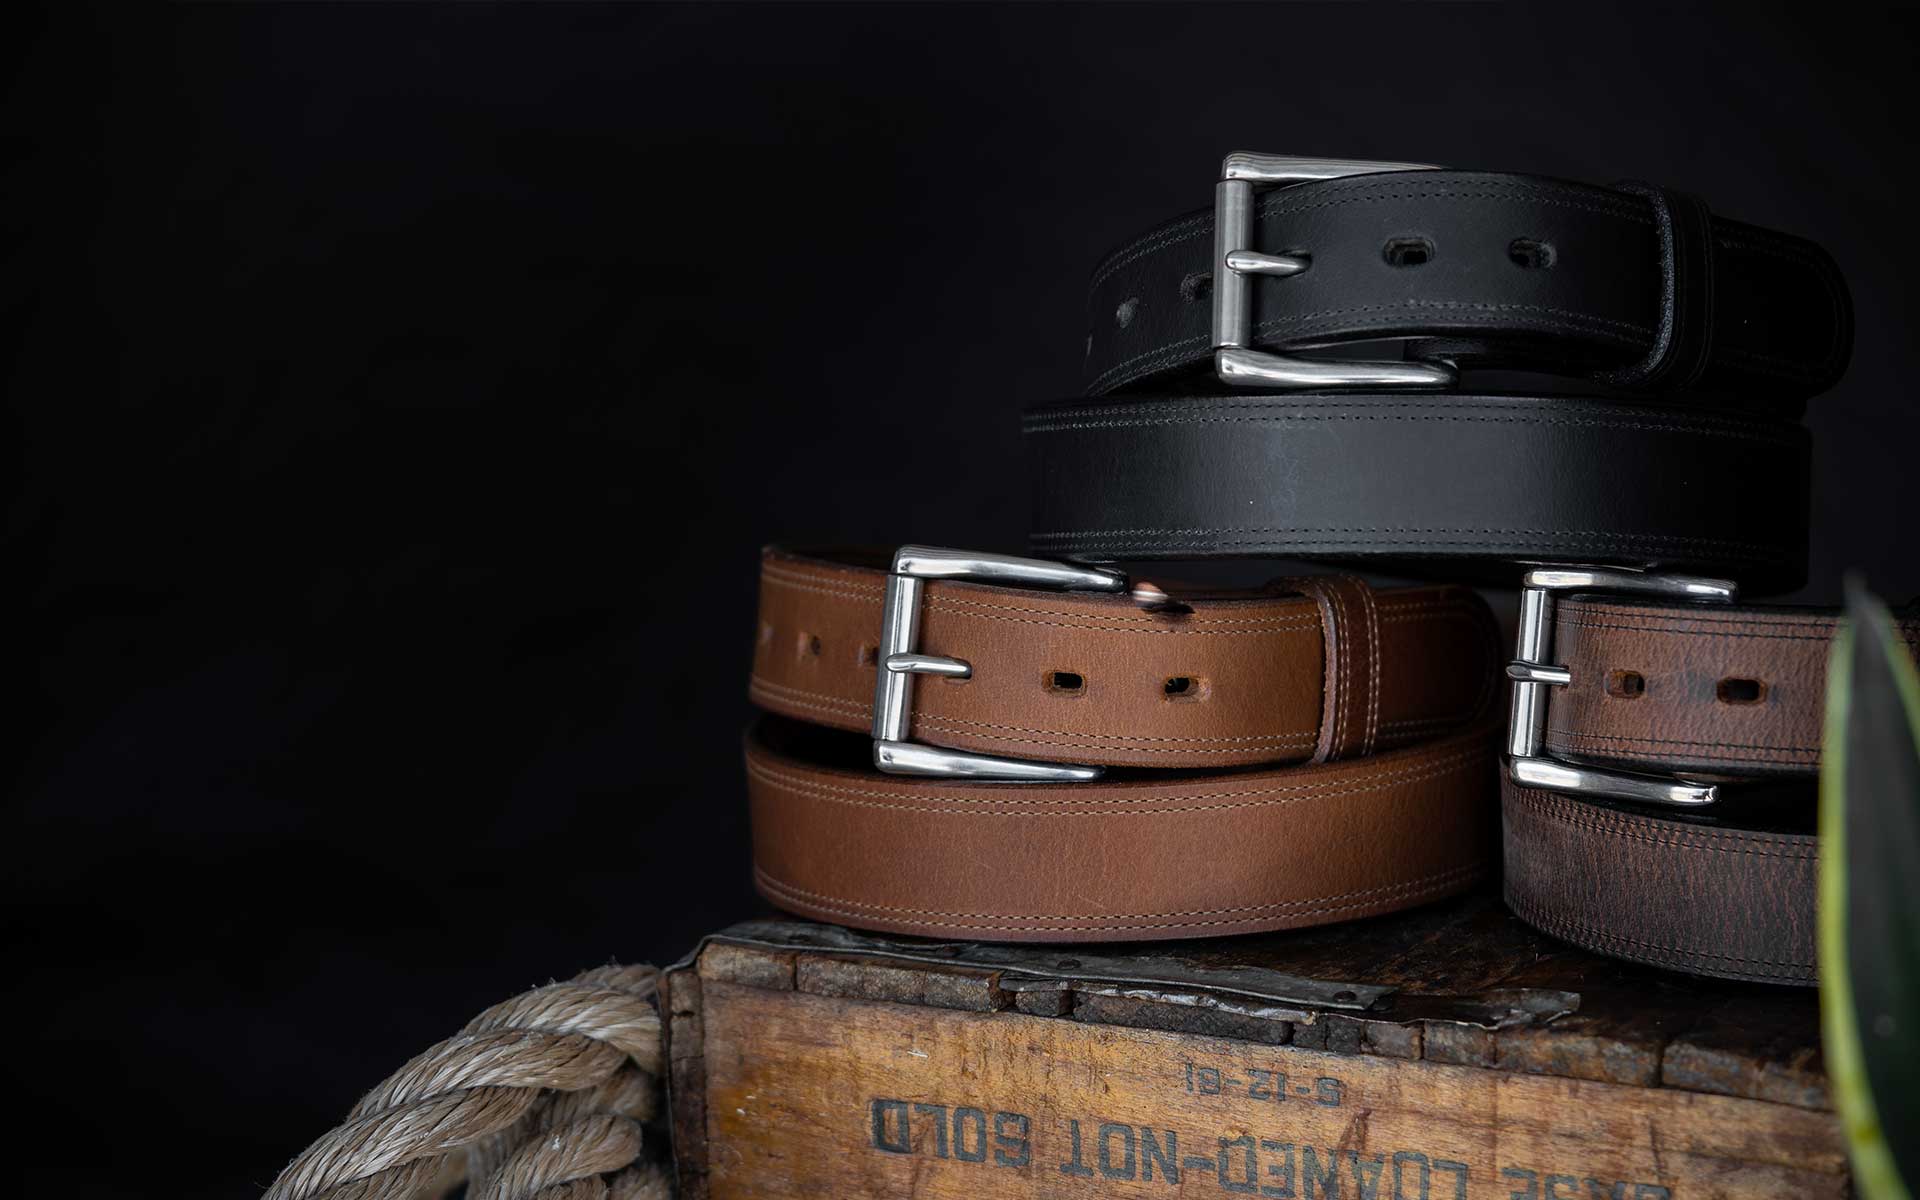 Big mens belts to size 60 USA Made Full Grain Leather